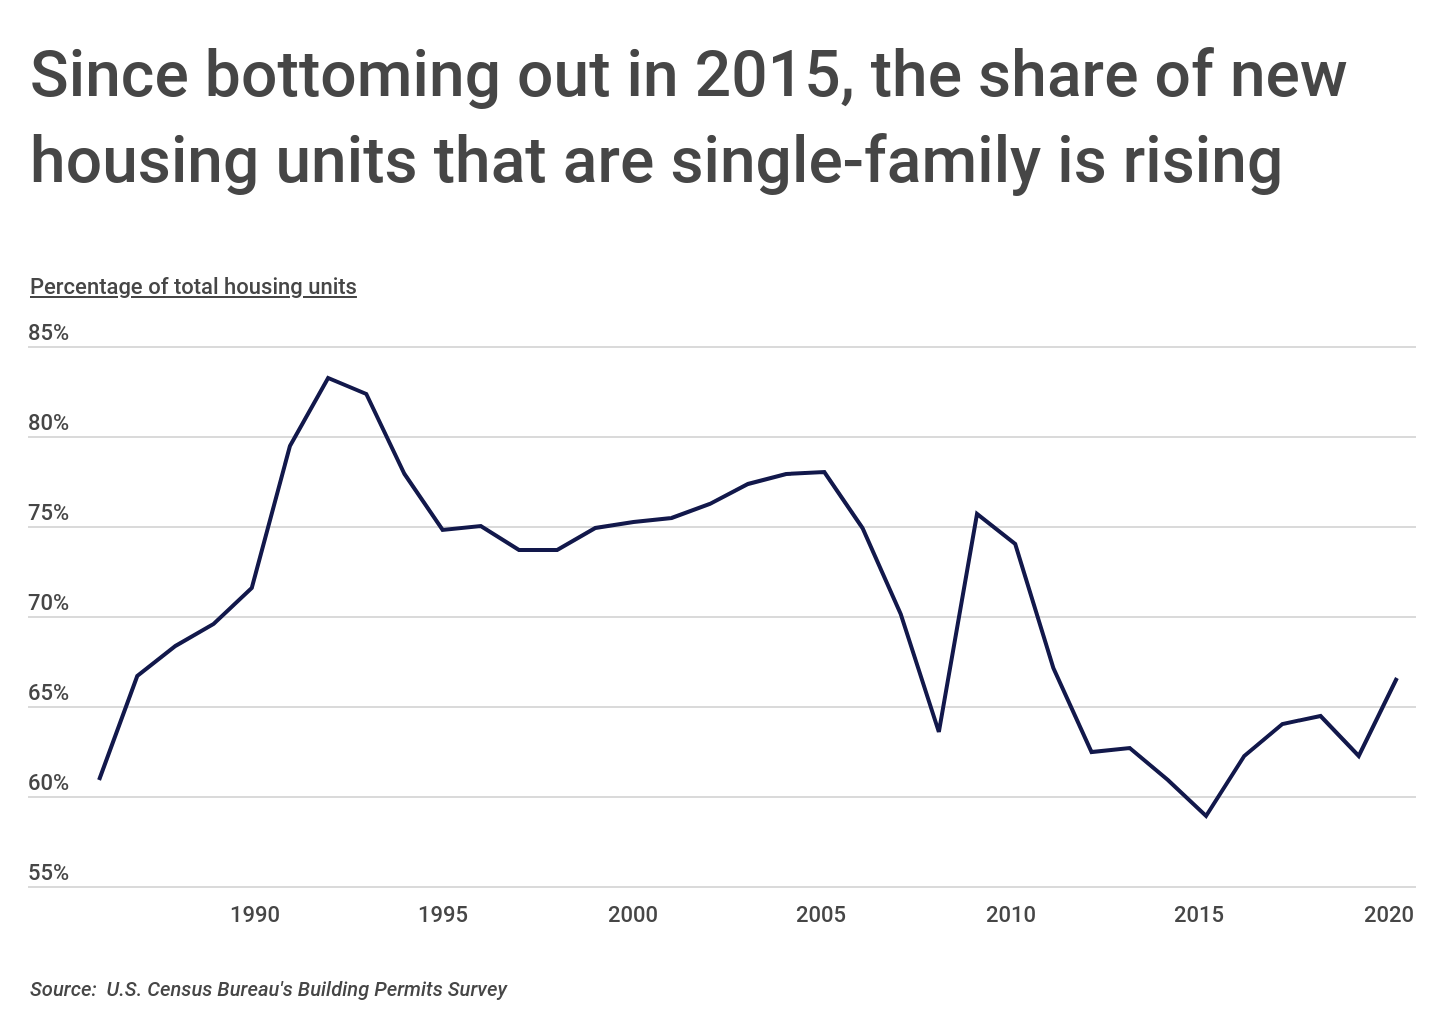 Chart1_The share of new housing units that are single-family is rising